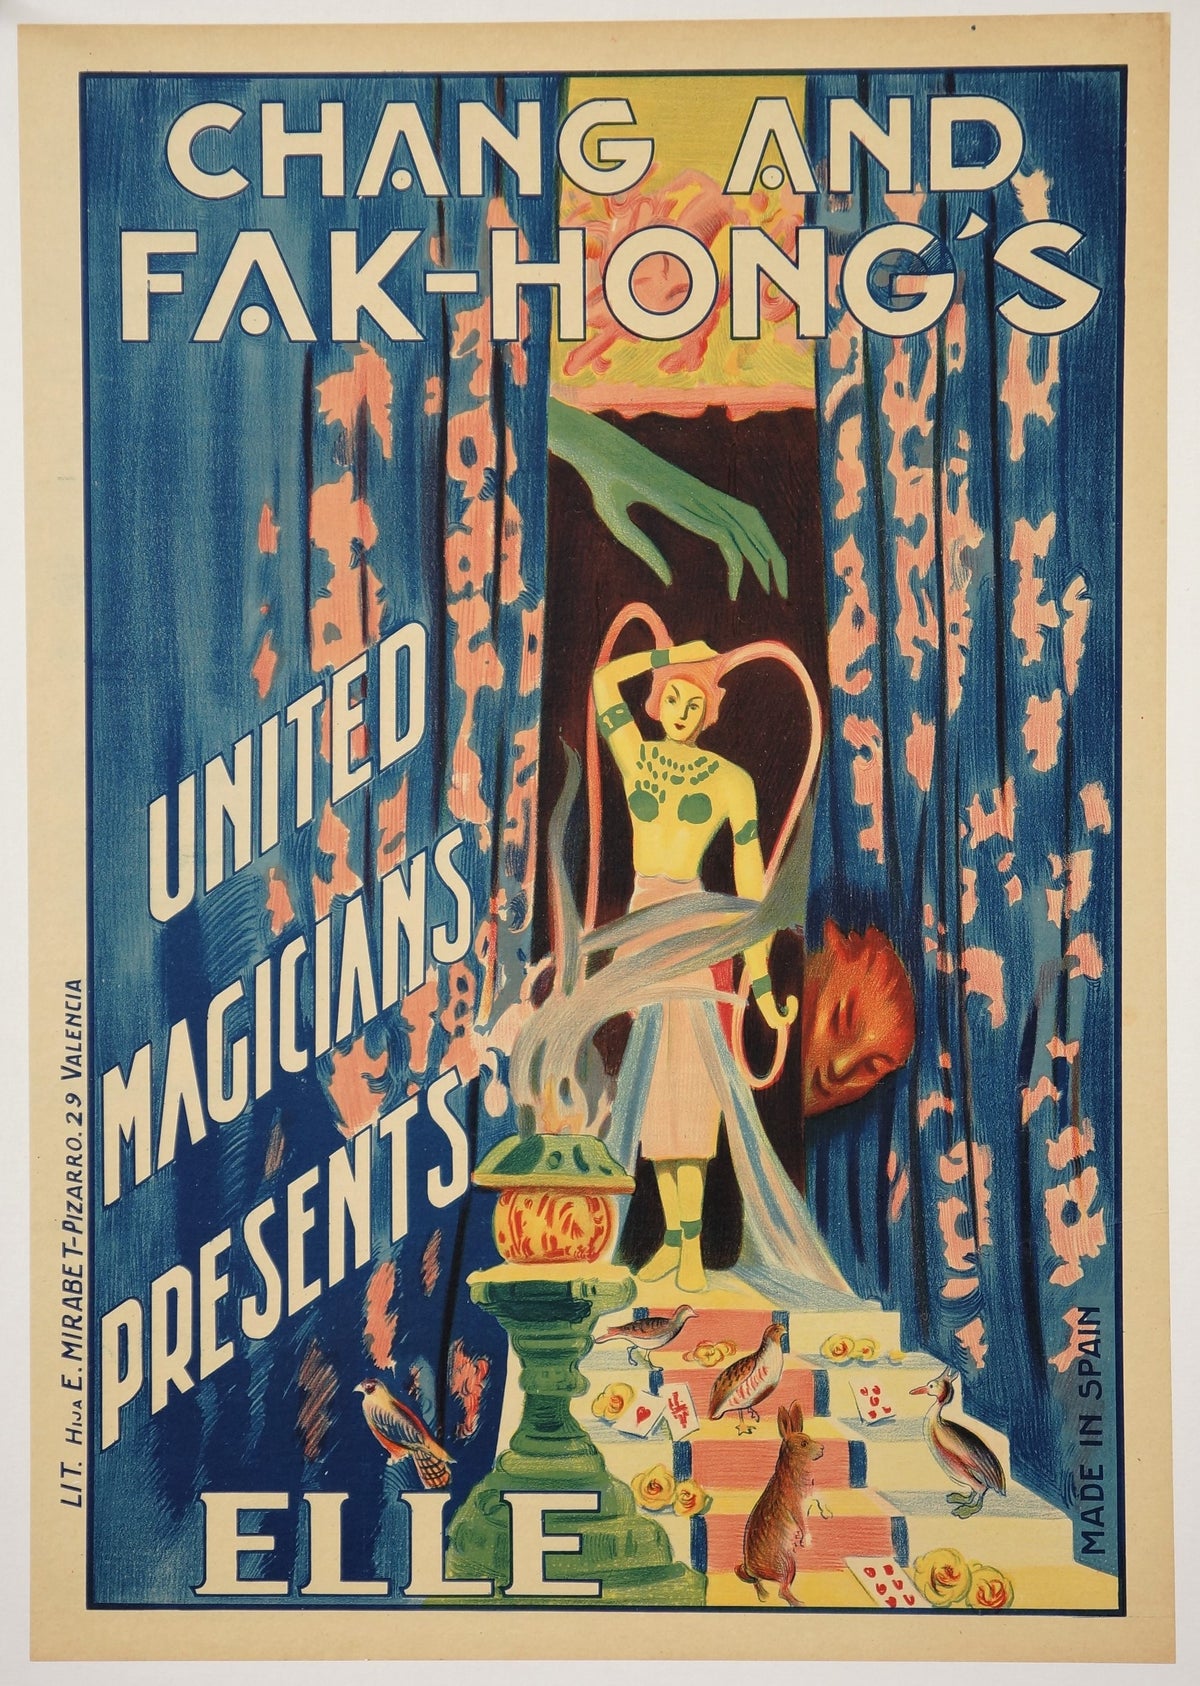 The Great Chang &amp; Fak-Hong - Authentic Vintage Poster